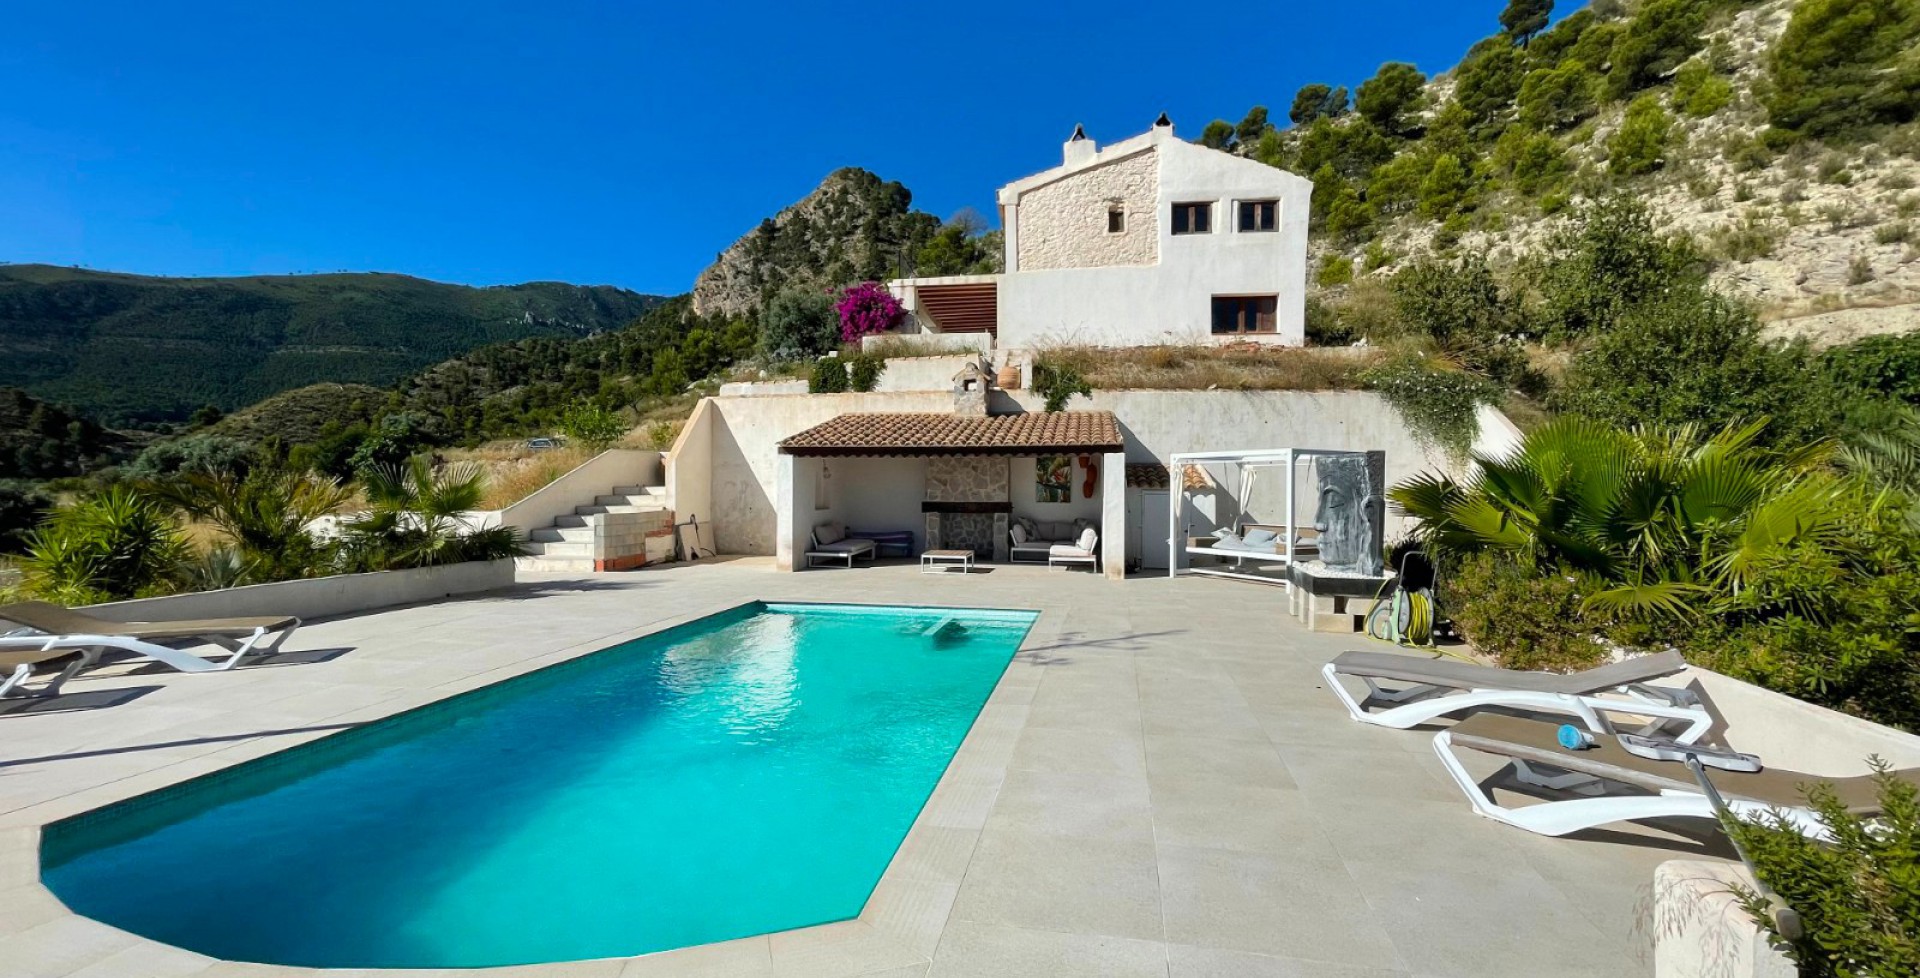 Spectacular country house with  fantastic swimming pool, Ricote, Murcia, Spain